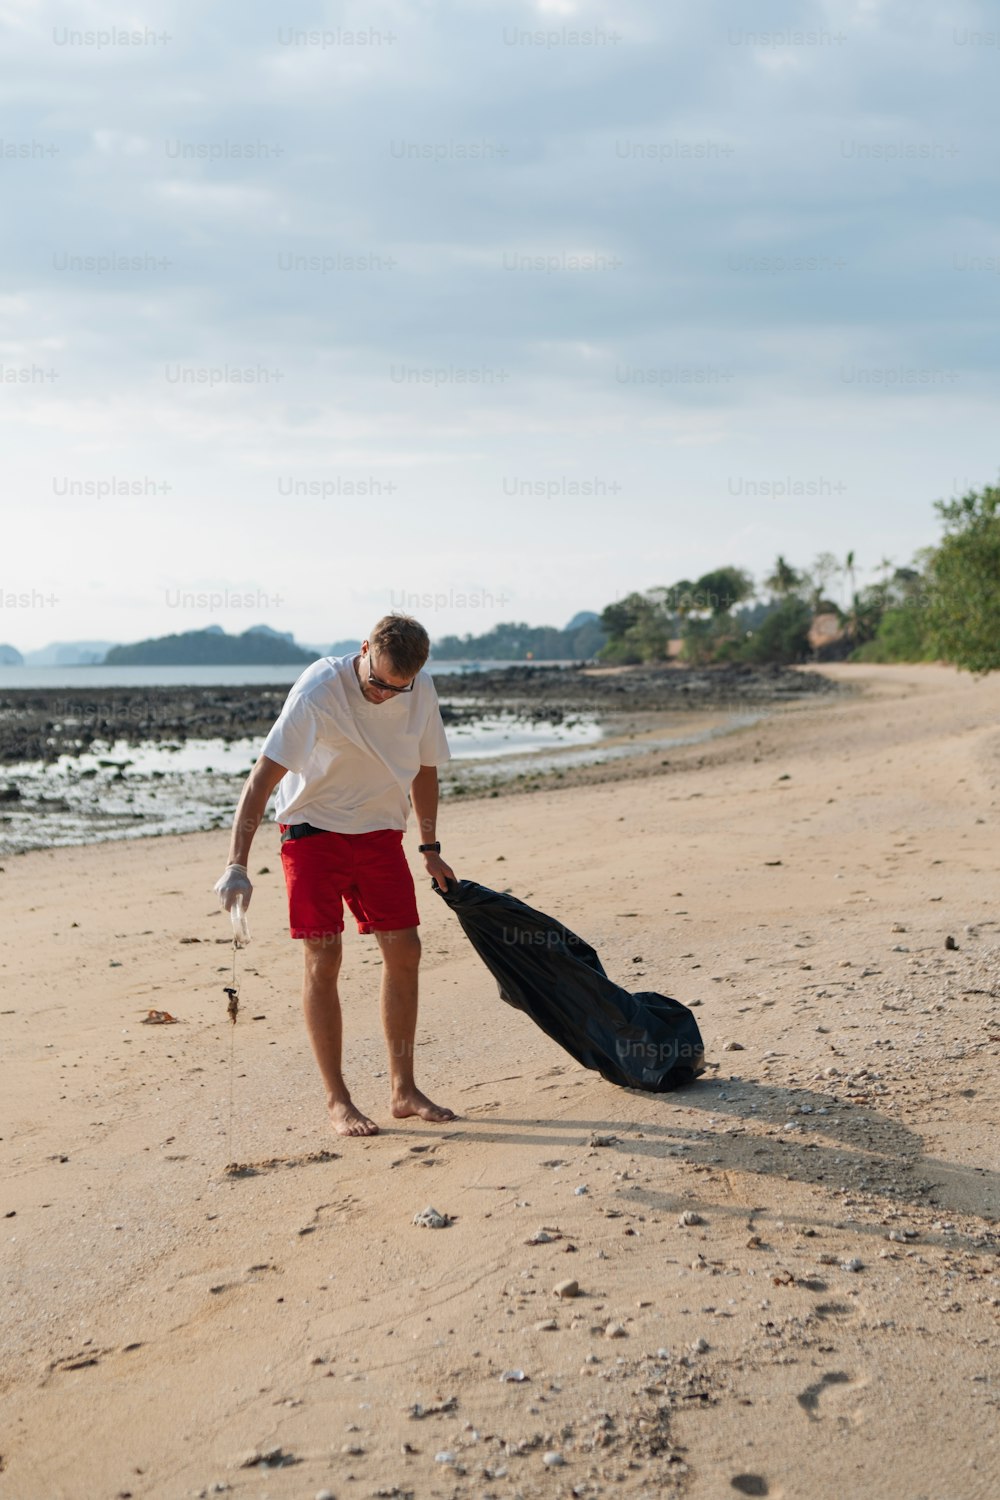 a man walking on a beach with a bag of luggage